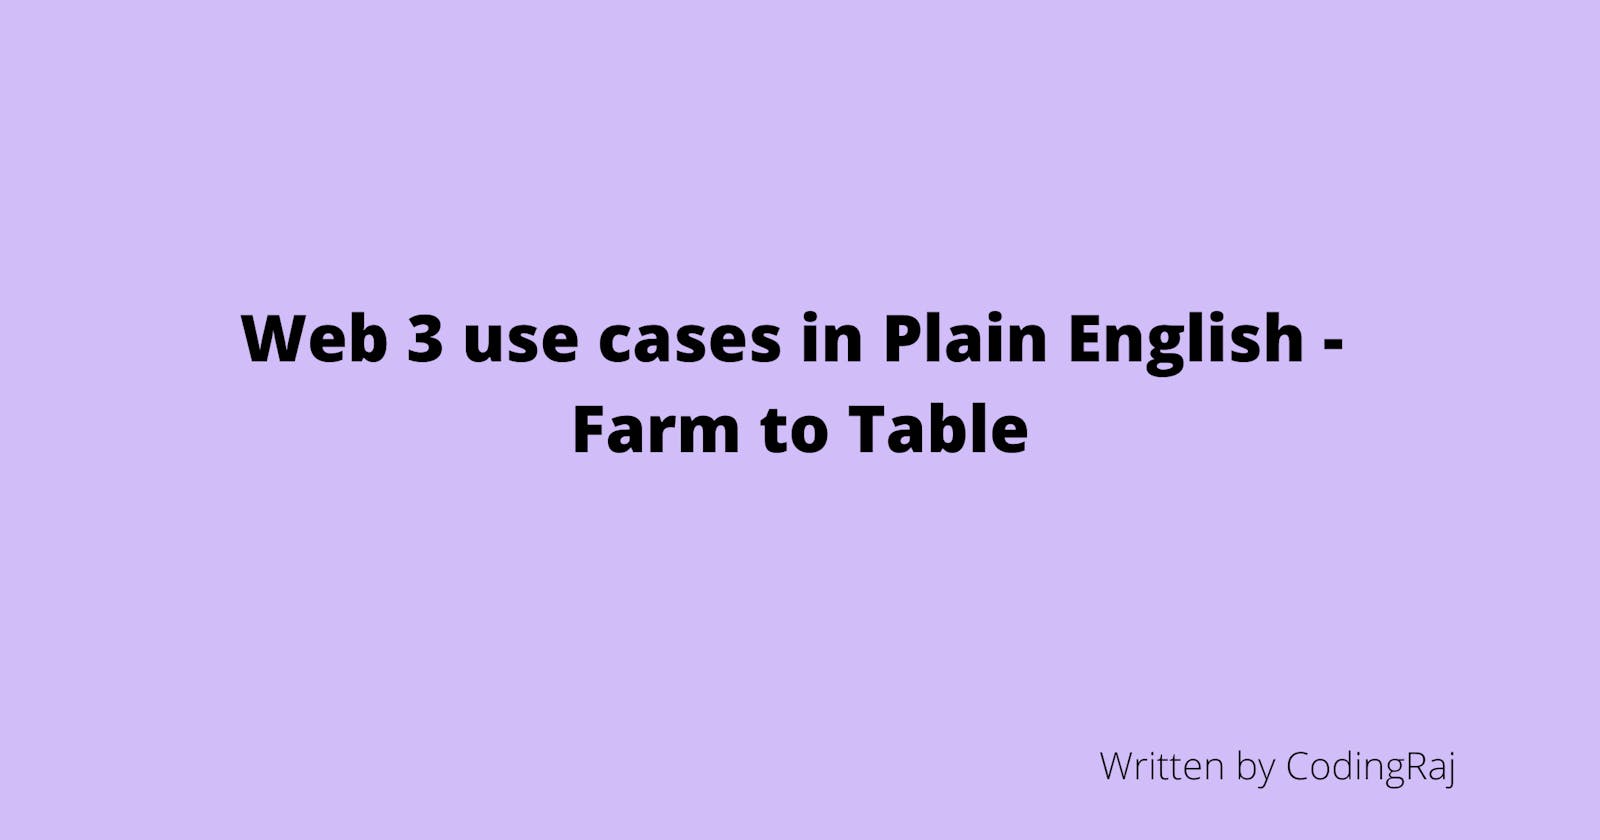 Web3 Use Cases - Farm to Table